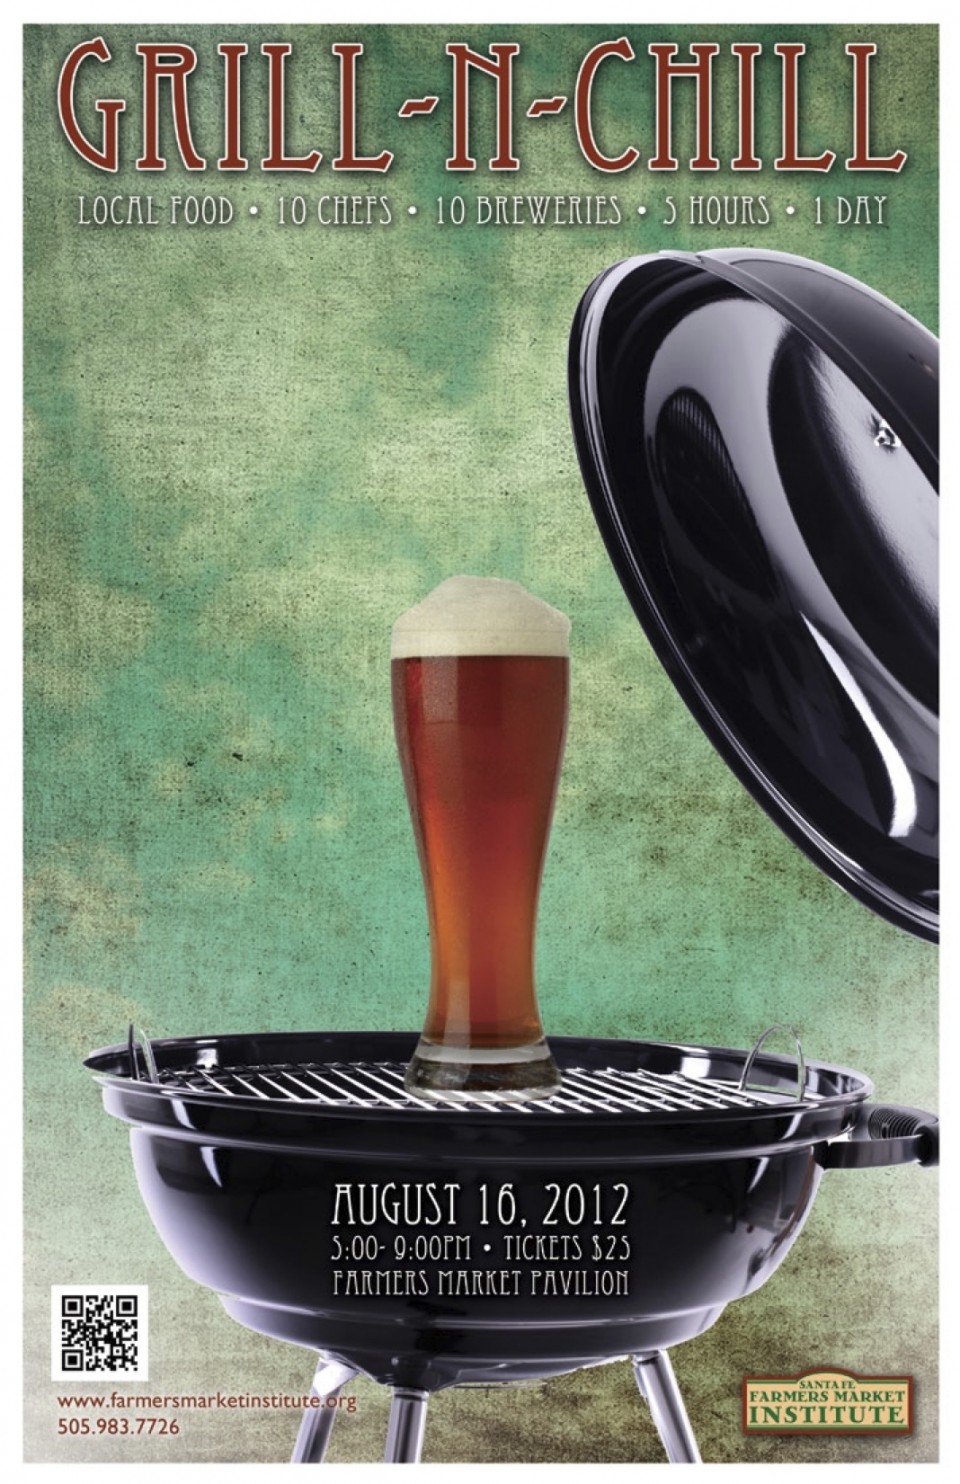 Grill n’ Chill – Thu, August 16,2012